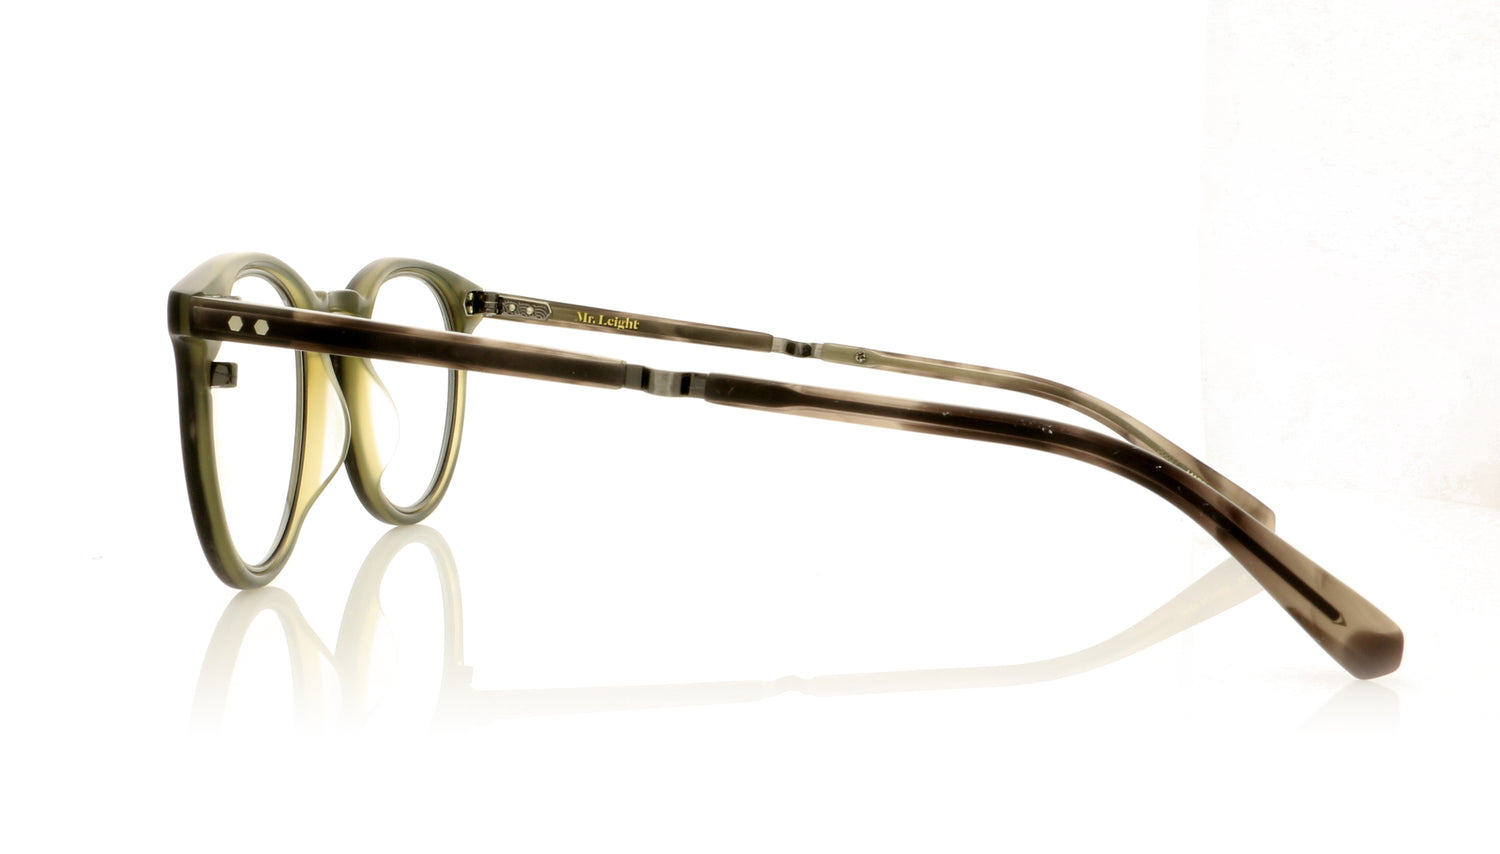 Mr. Leight Crosby C ML1013 MOLA-PW Matte Olive Laminate Glasses - Side